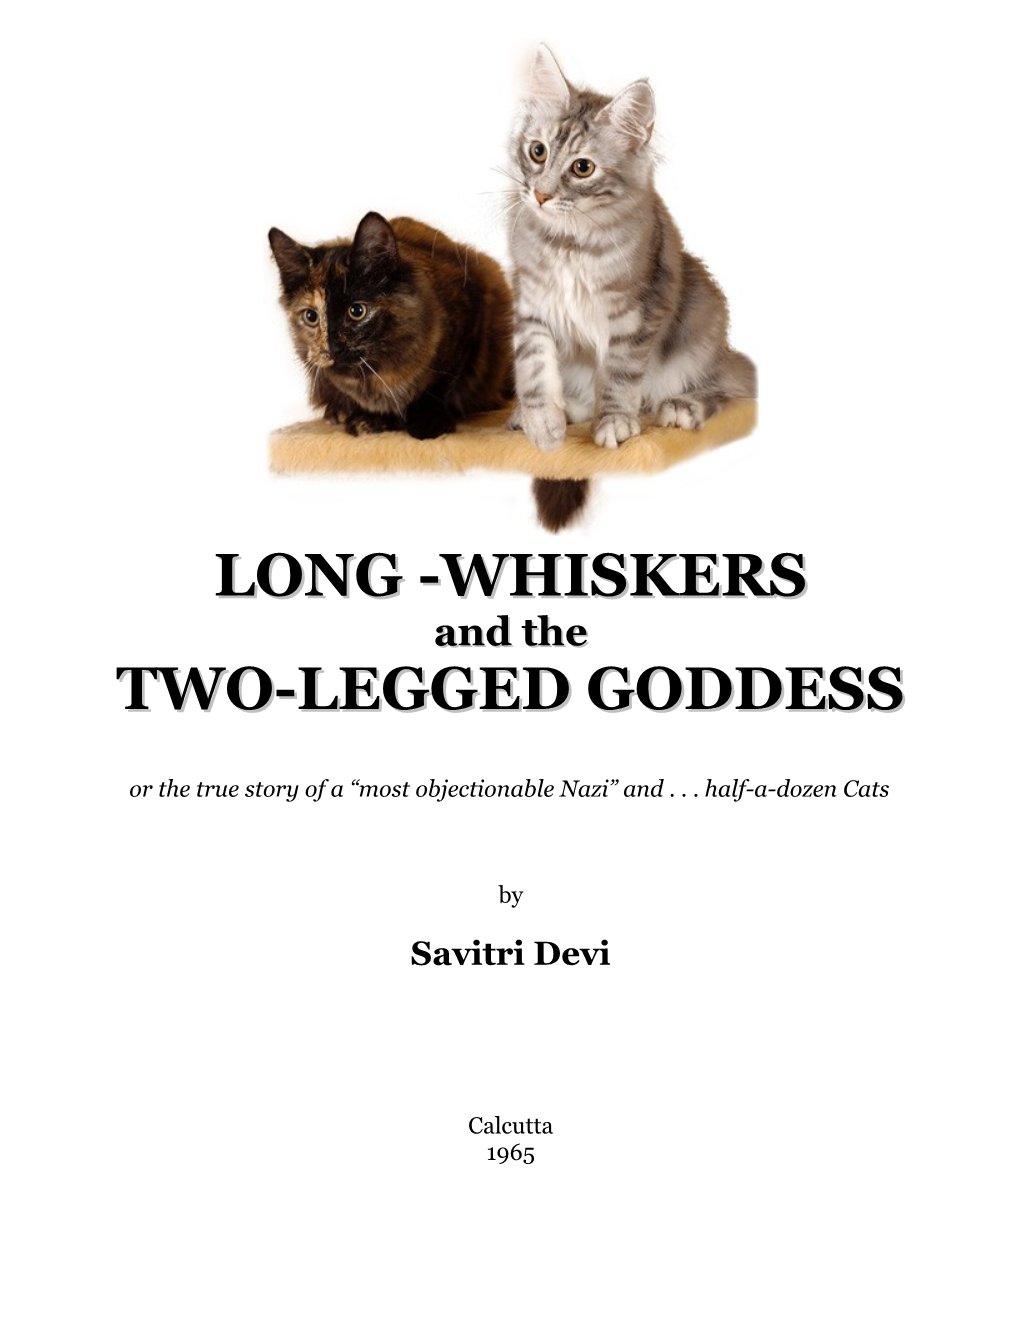 Long-Whiskers and the Two-Legged Goddess